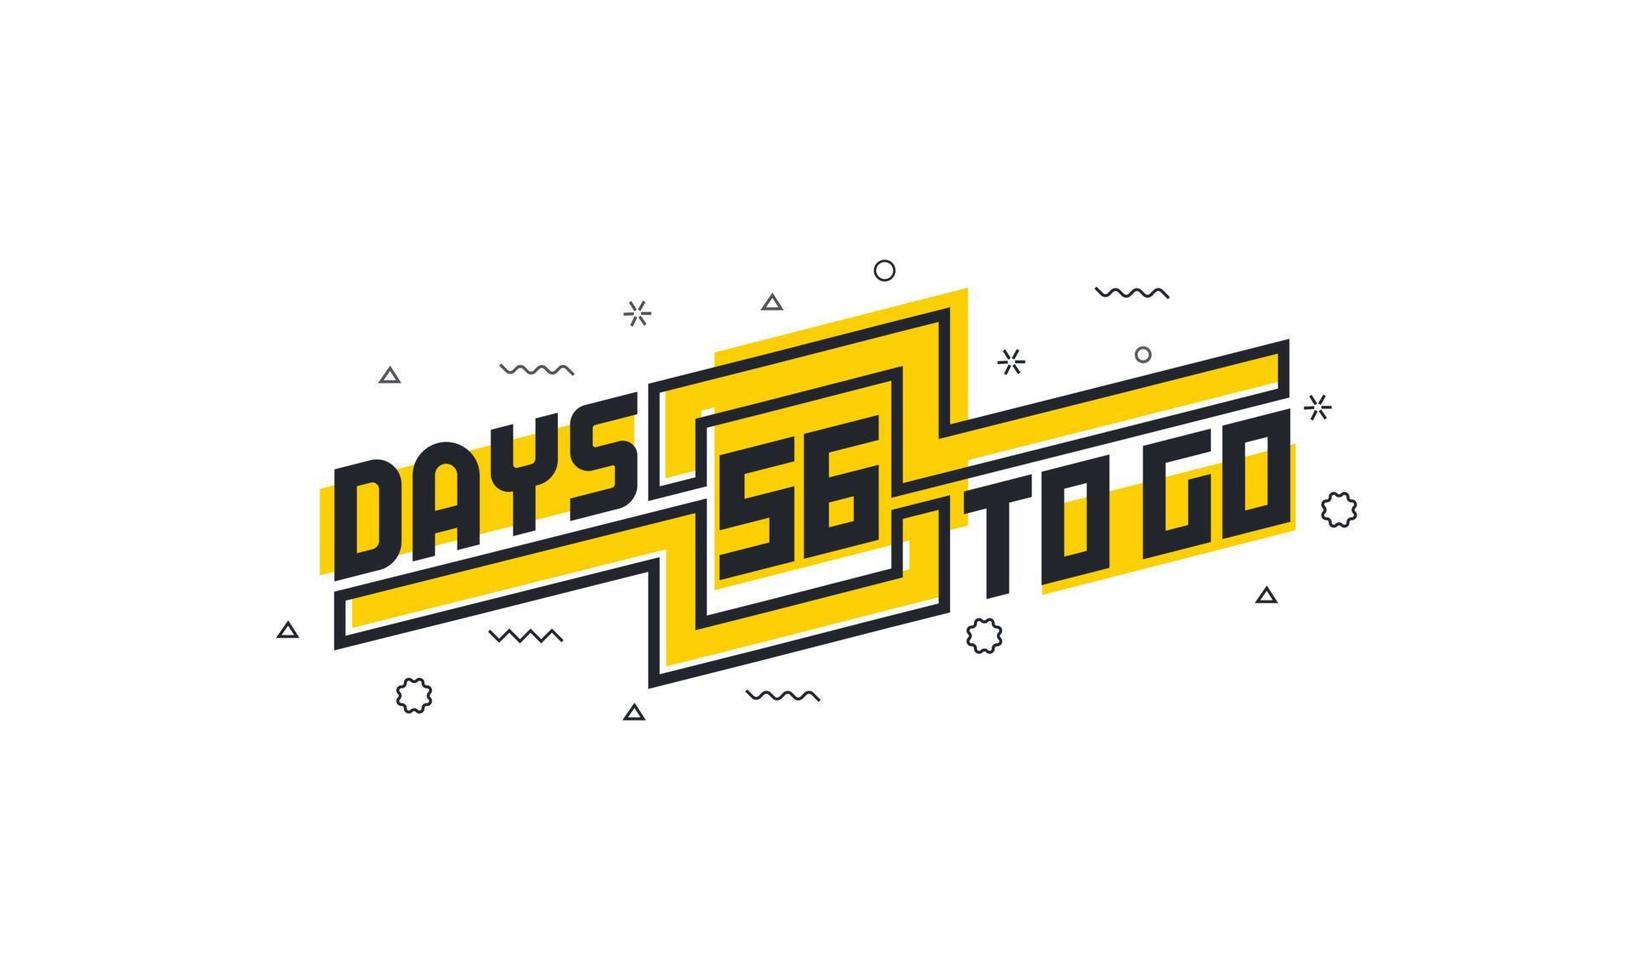 56 days to go countdown sign for sale or promotion. vector